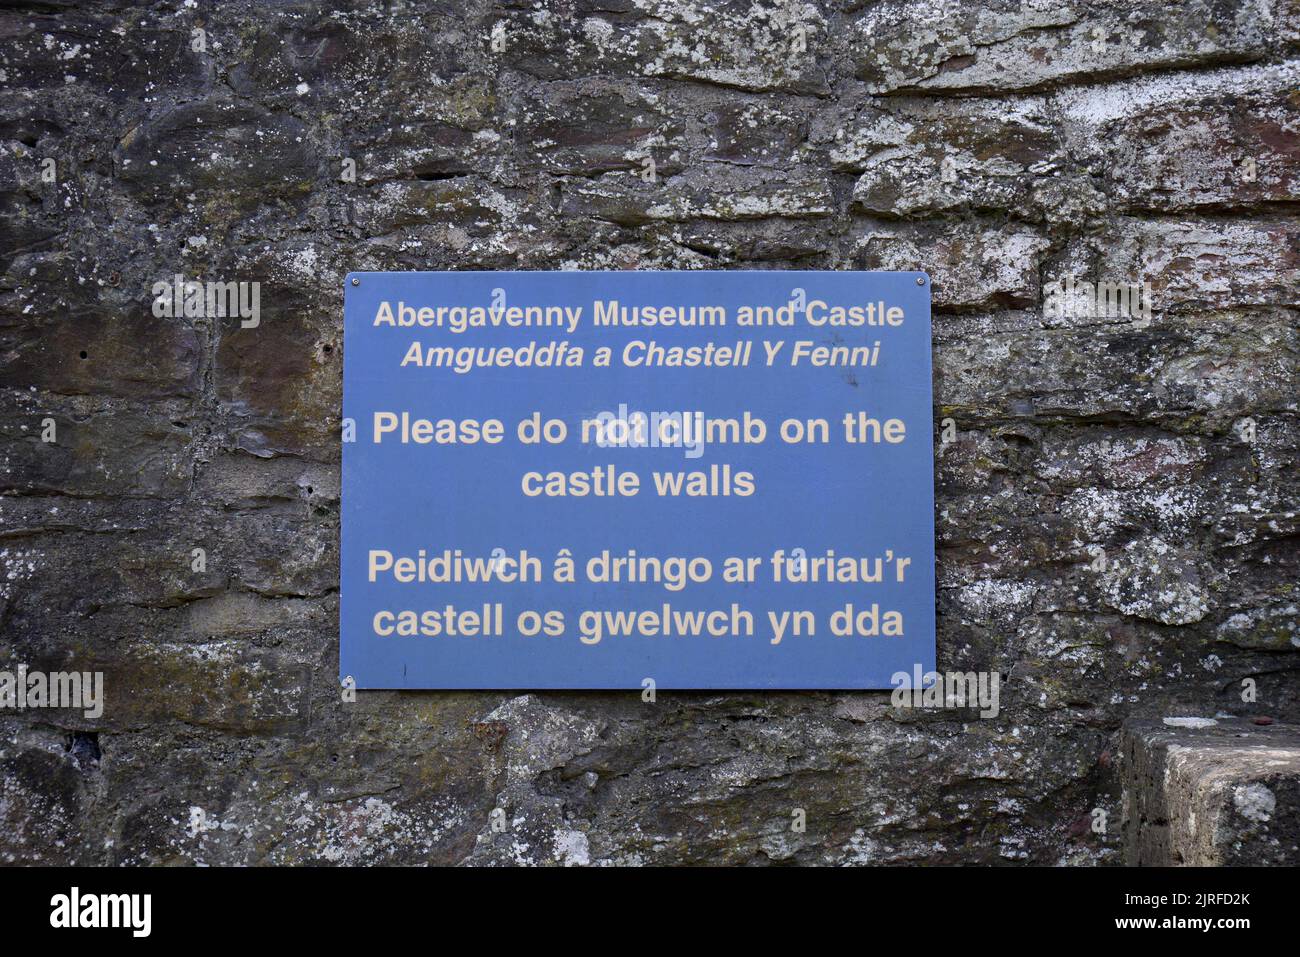 Sign in English and Welsh warning people not to climb on the castle walls, Abergavenny Castle, Wales, Inited Kingdom Stock Photo